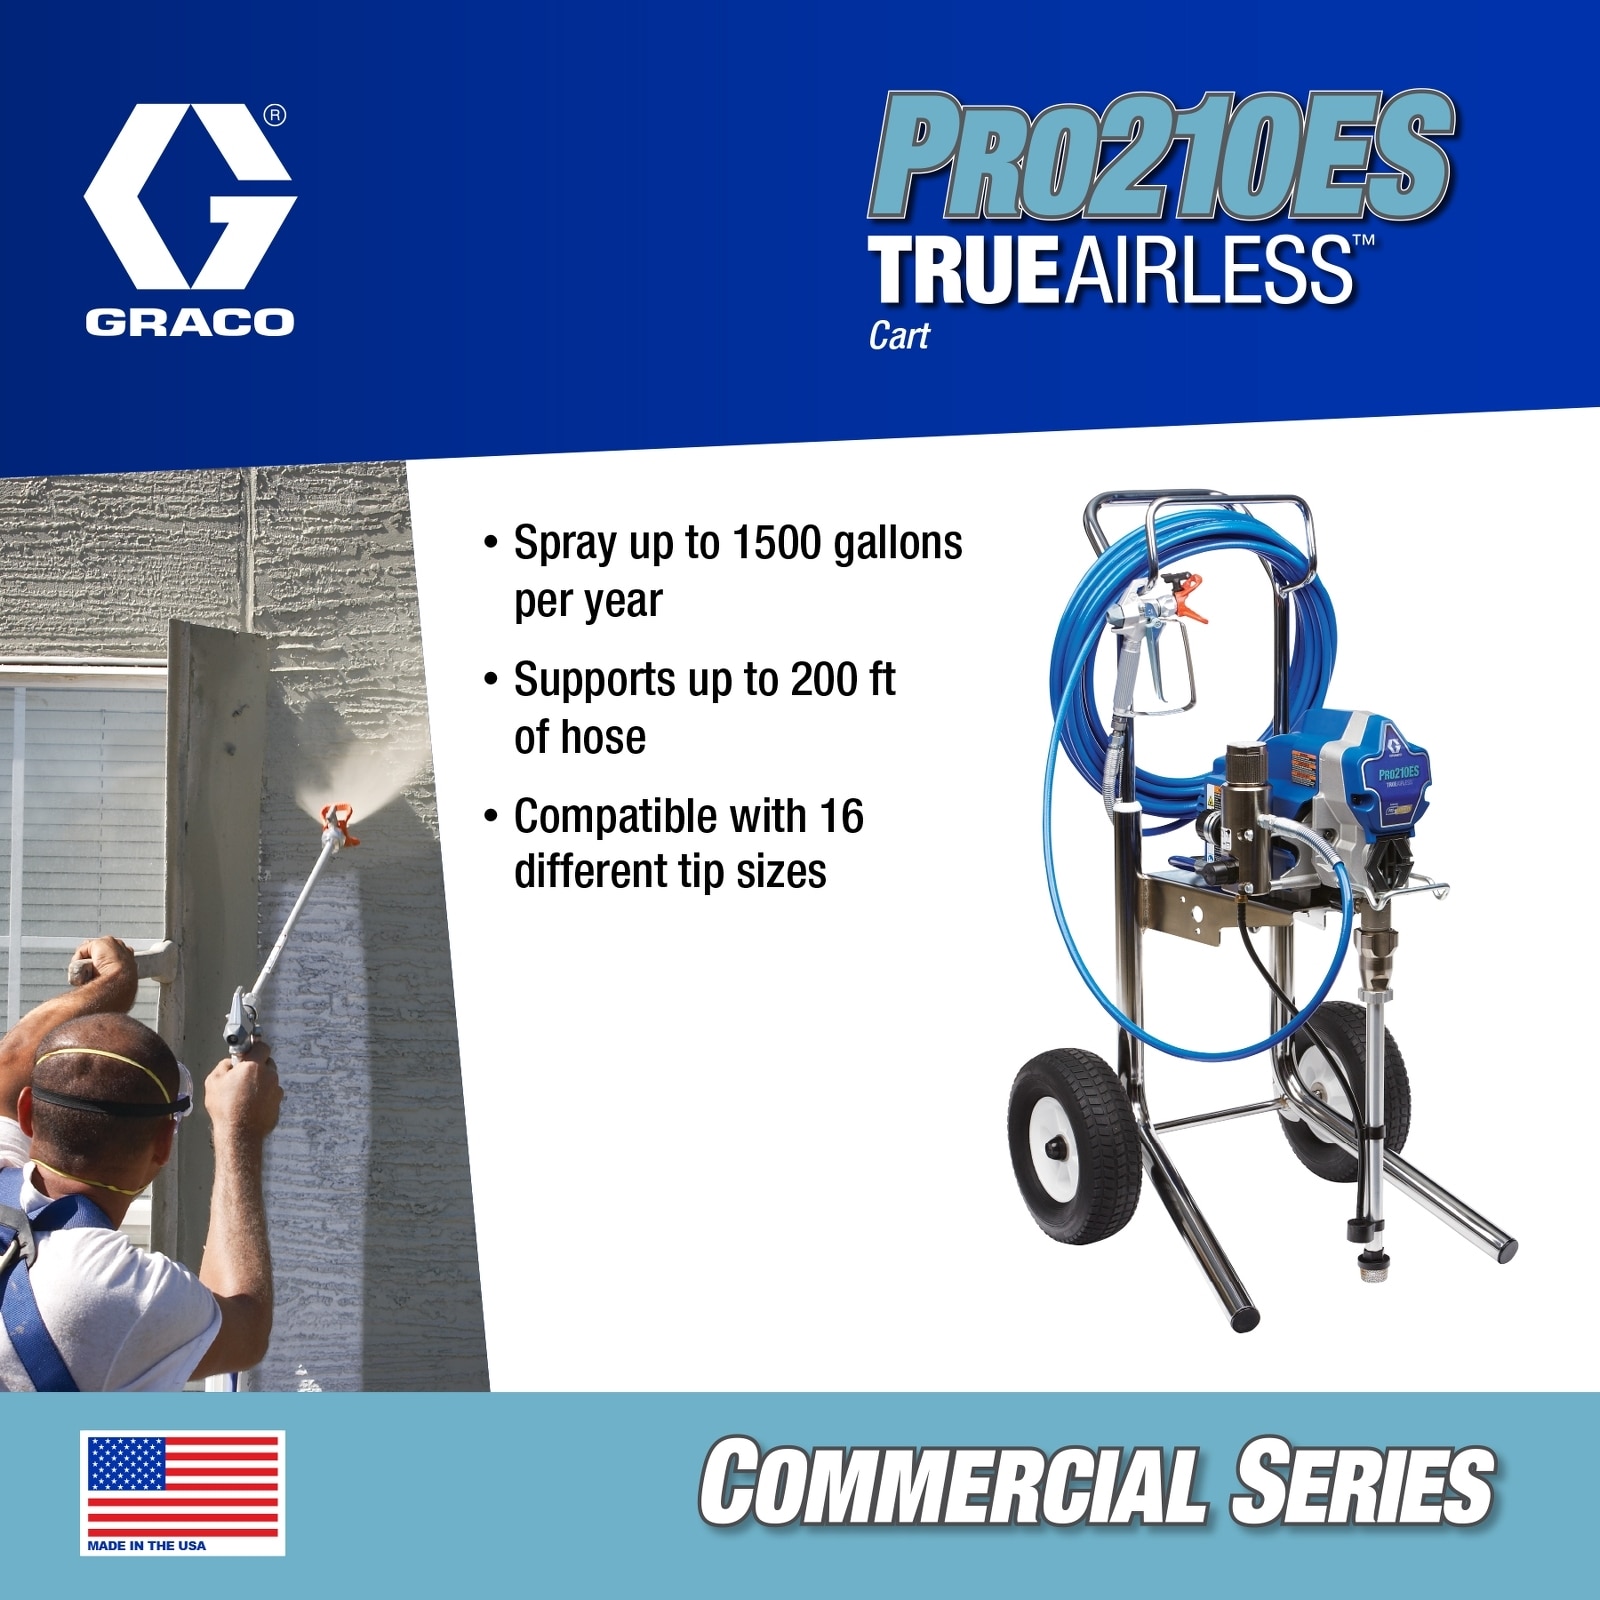 Graco Pro 210Es Pc Airless Paint Sprayer Stand 